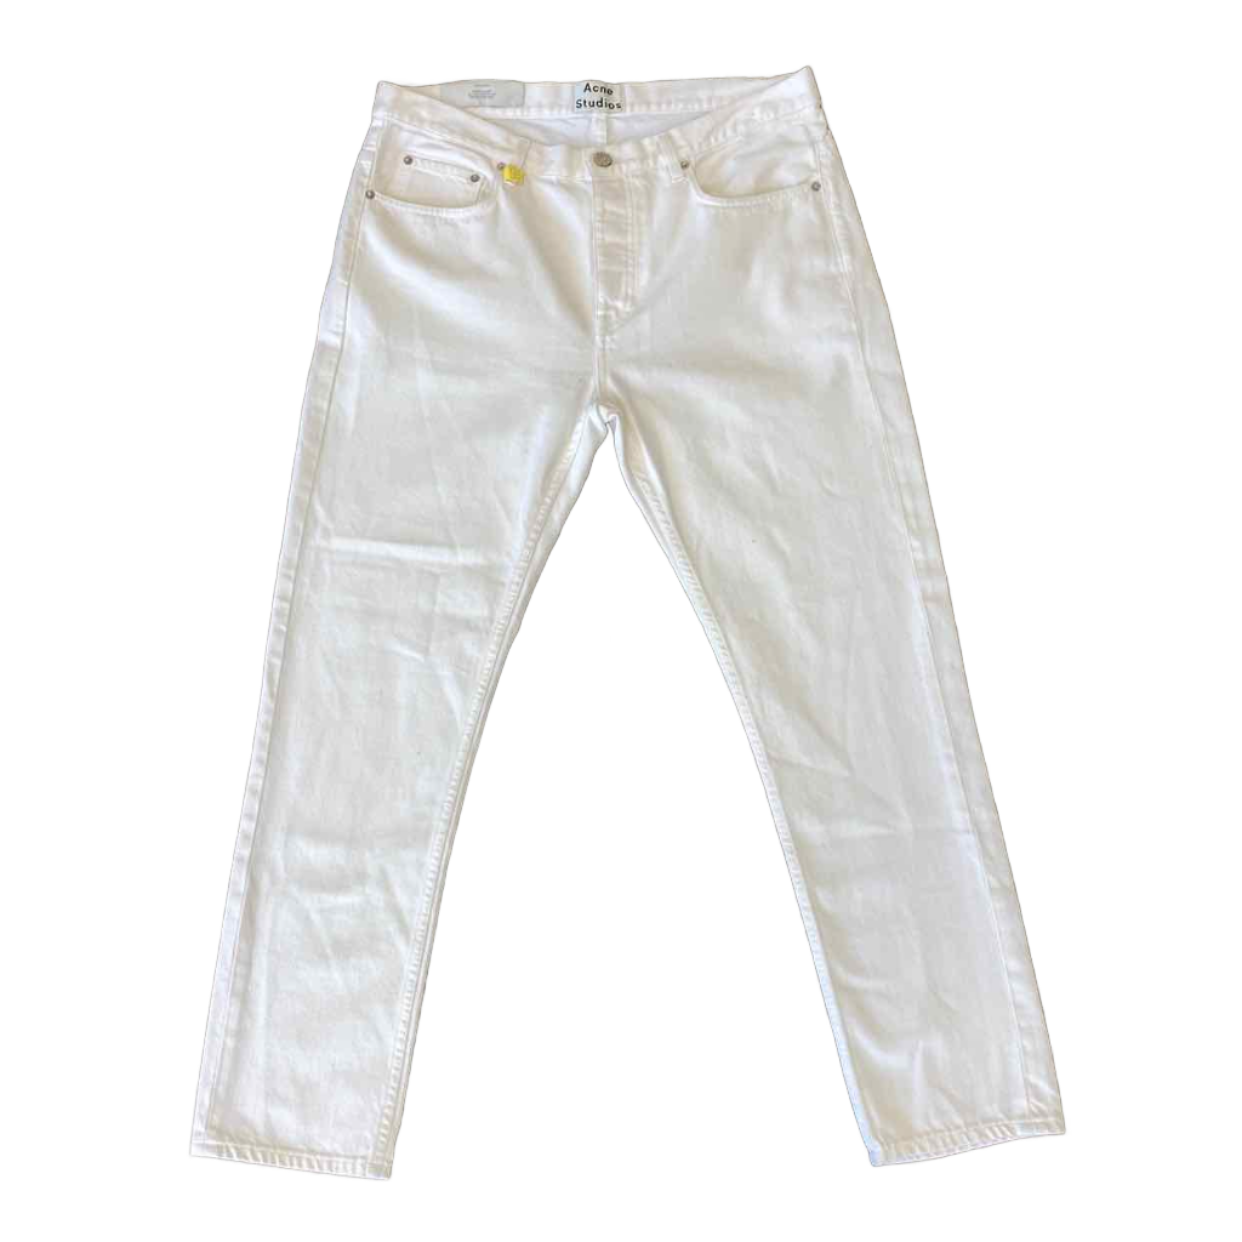 Acne Studios Pants &quot;RELAXED&quot; White Used Size 36